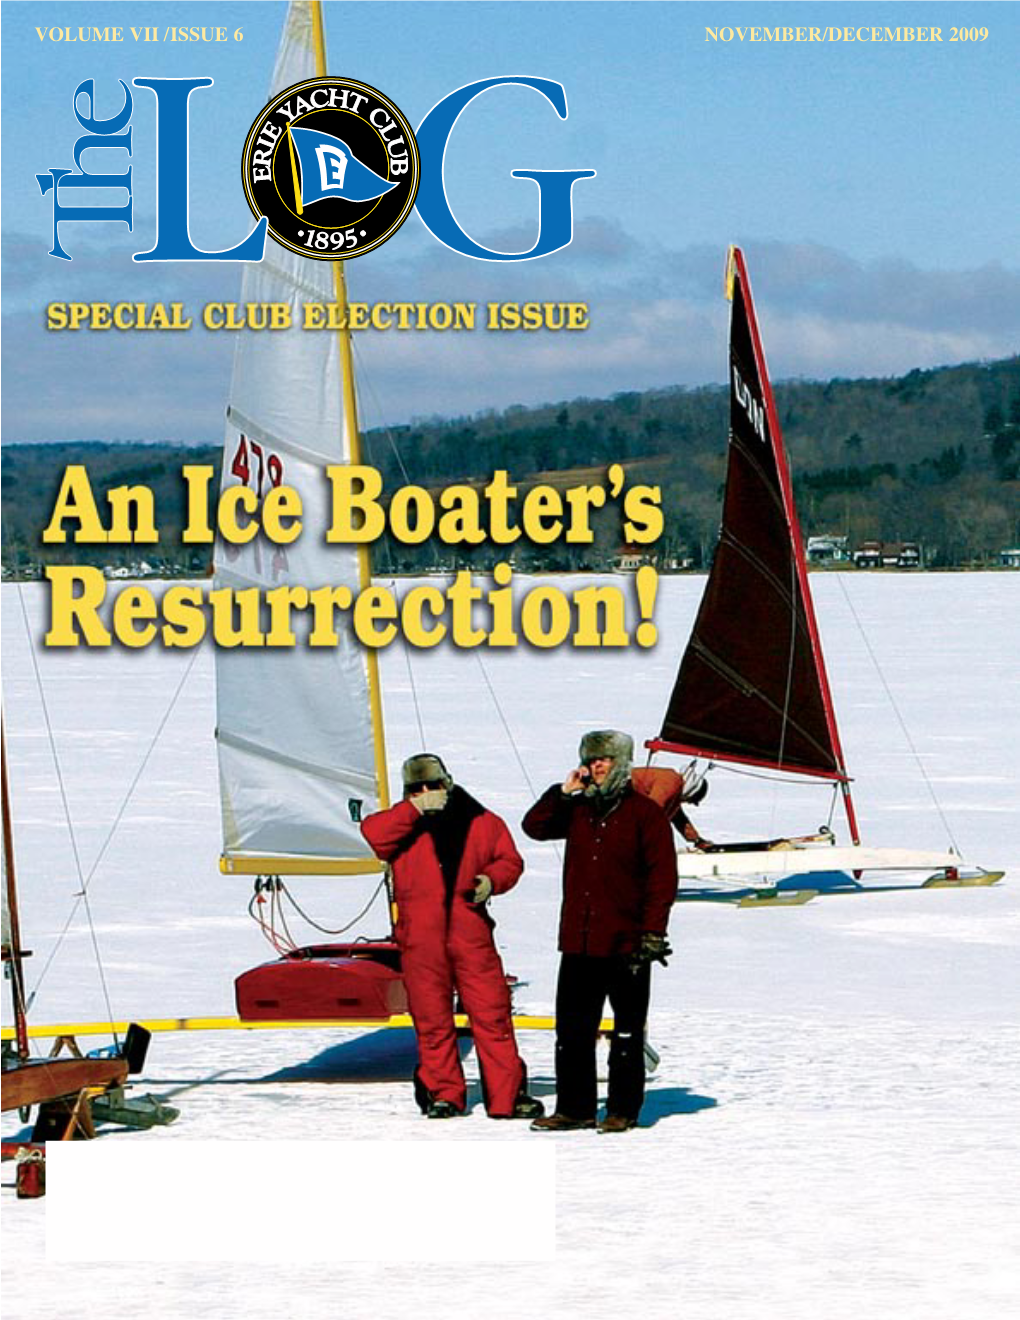 VOLUME VII /ISSUE 6 NOVEMBER/DECEMBER 2009 on the an Ice Boater’S Resurrection!